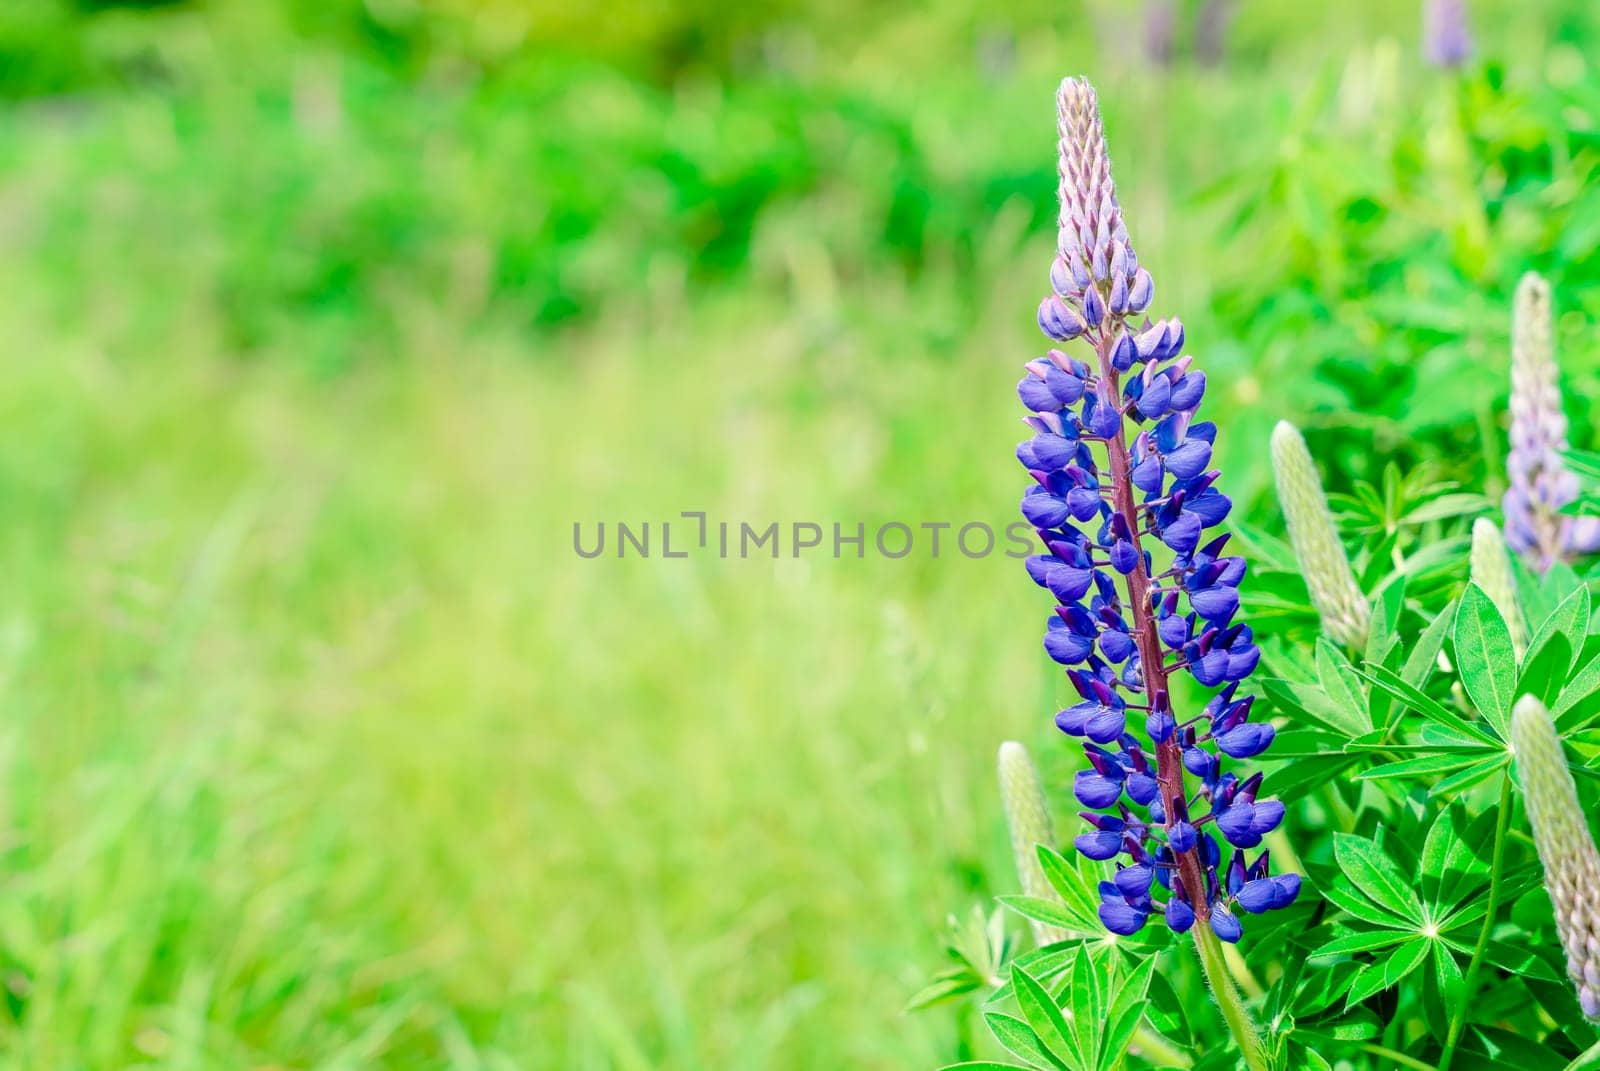 lupine flowers on meadow at sunset on a warm summer day  Summer flowers.  Summertime  Space for text  High quality photo by Iryna_Melnyk